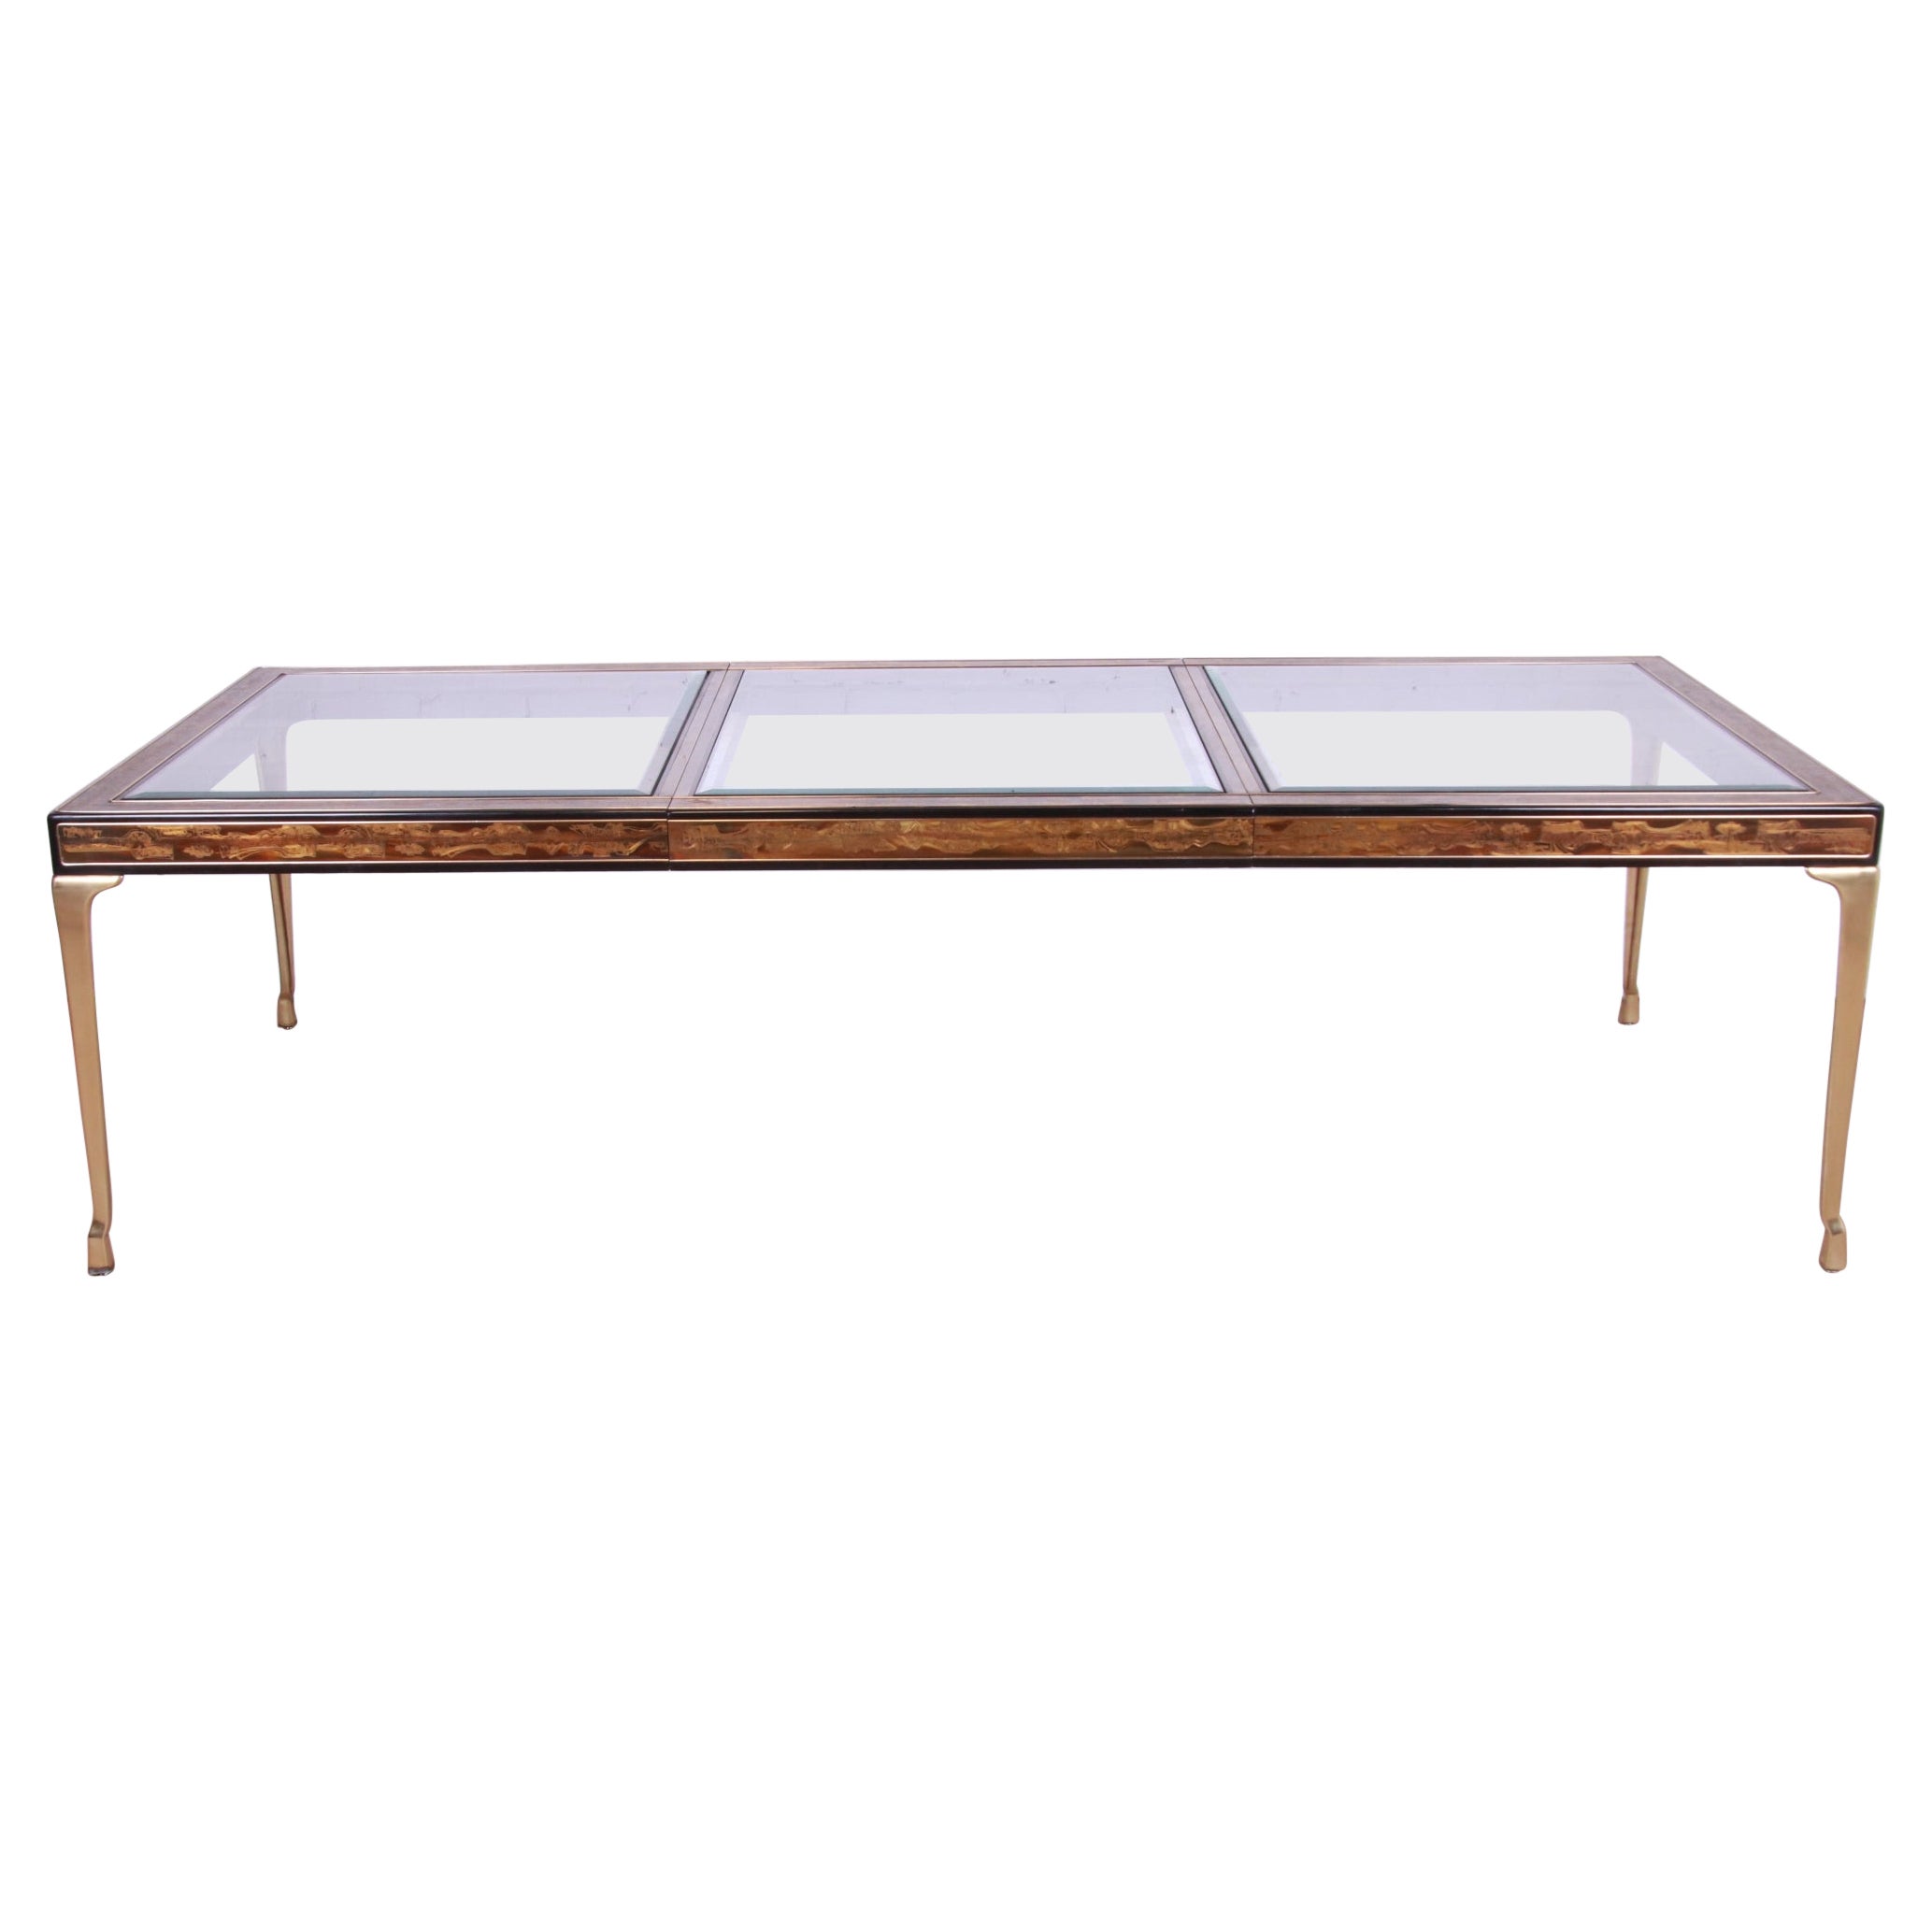 Bernard Rohne for Mastercraft Acid Etched Brass Extension Dining Table, 1970s